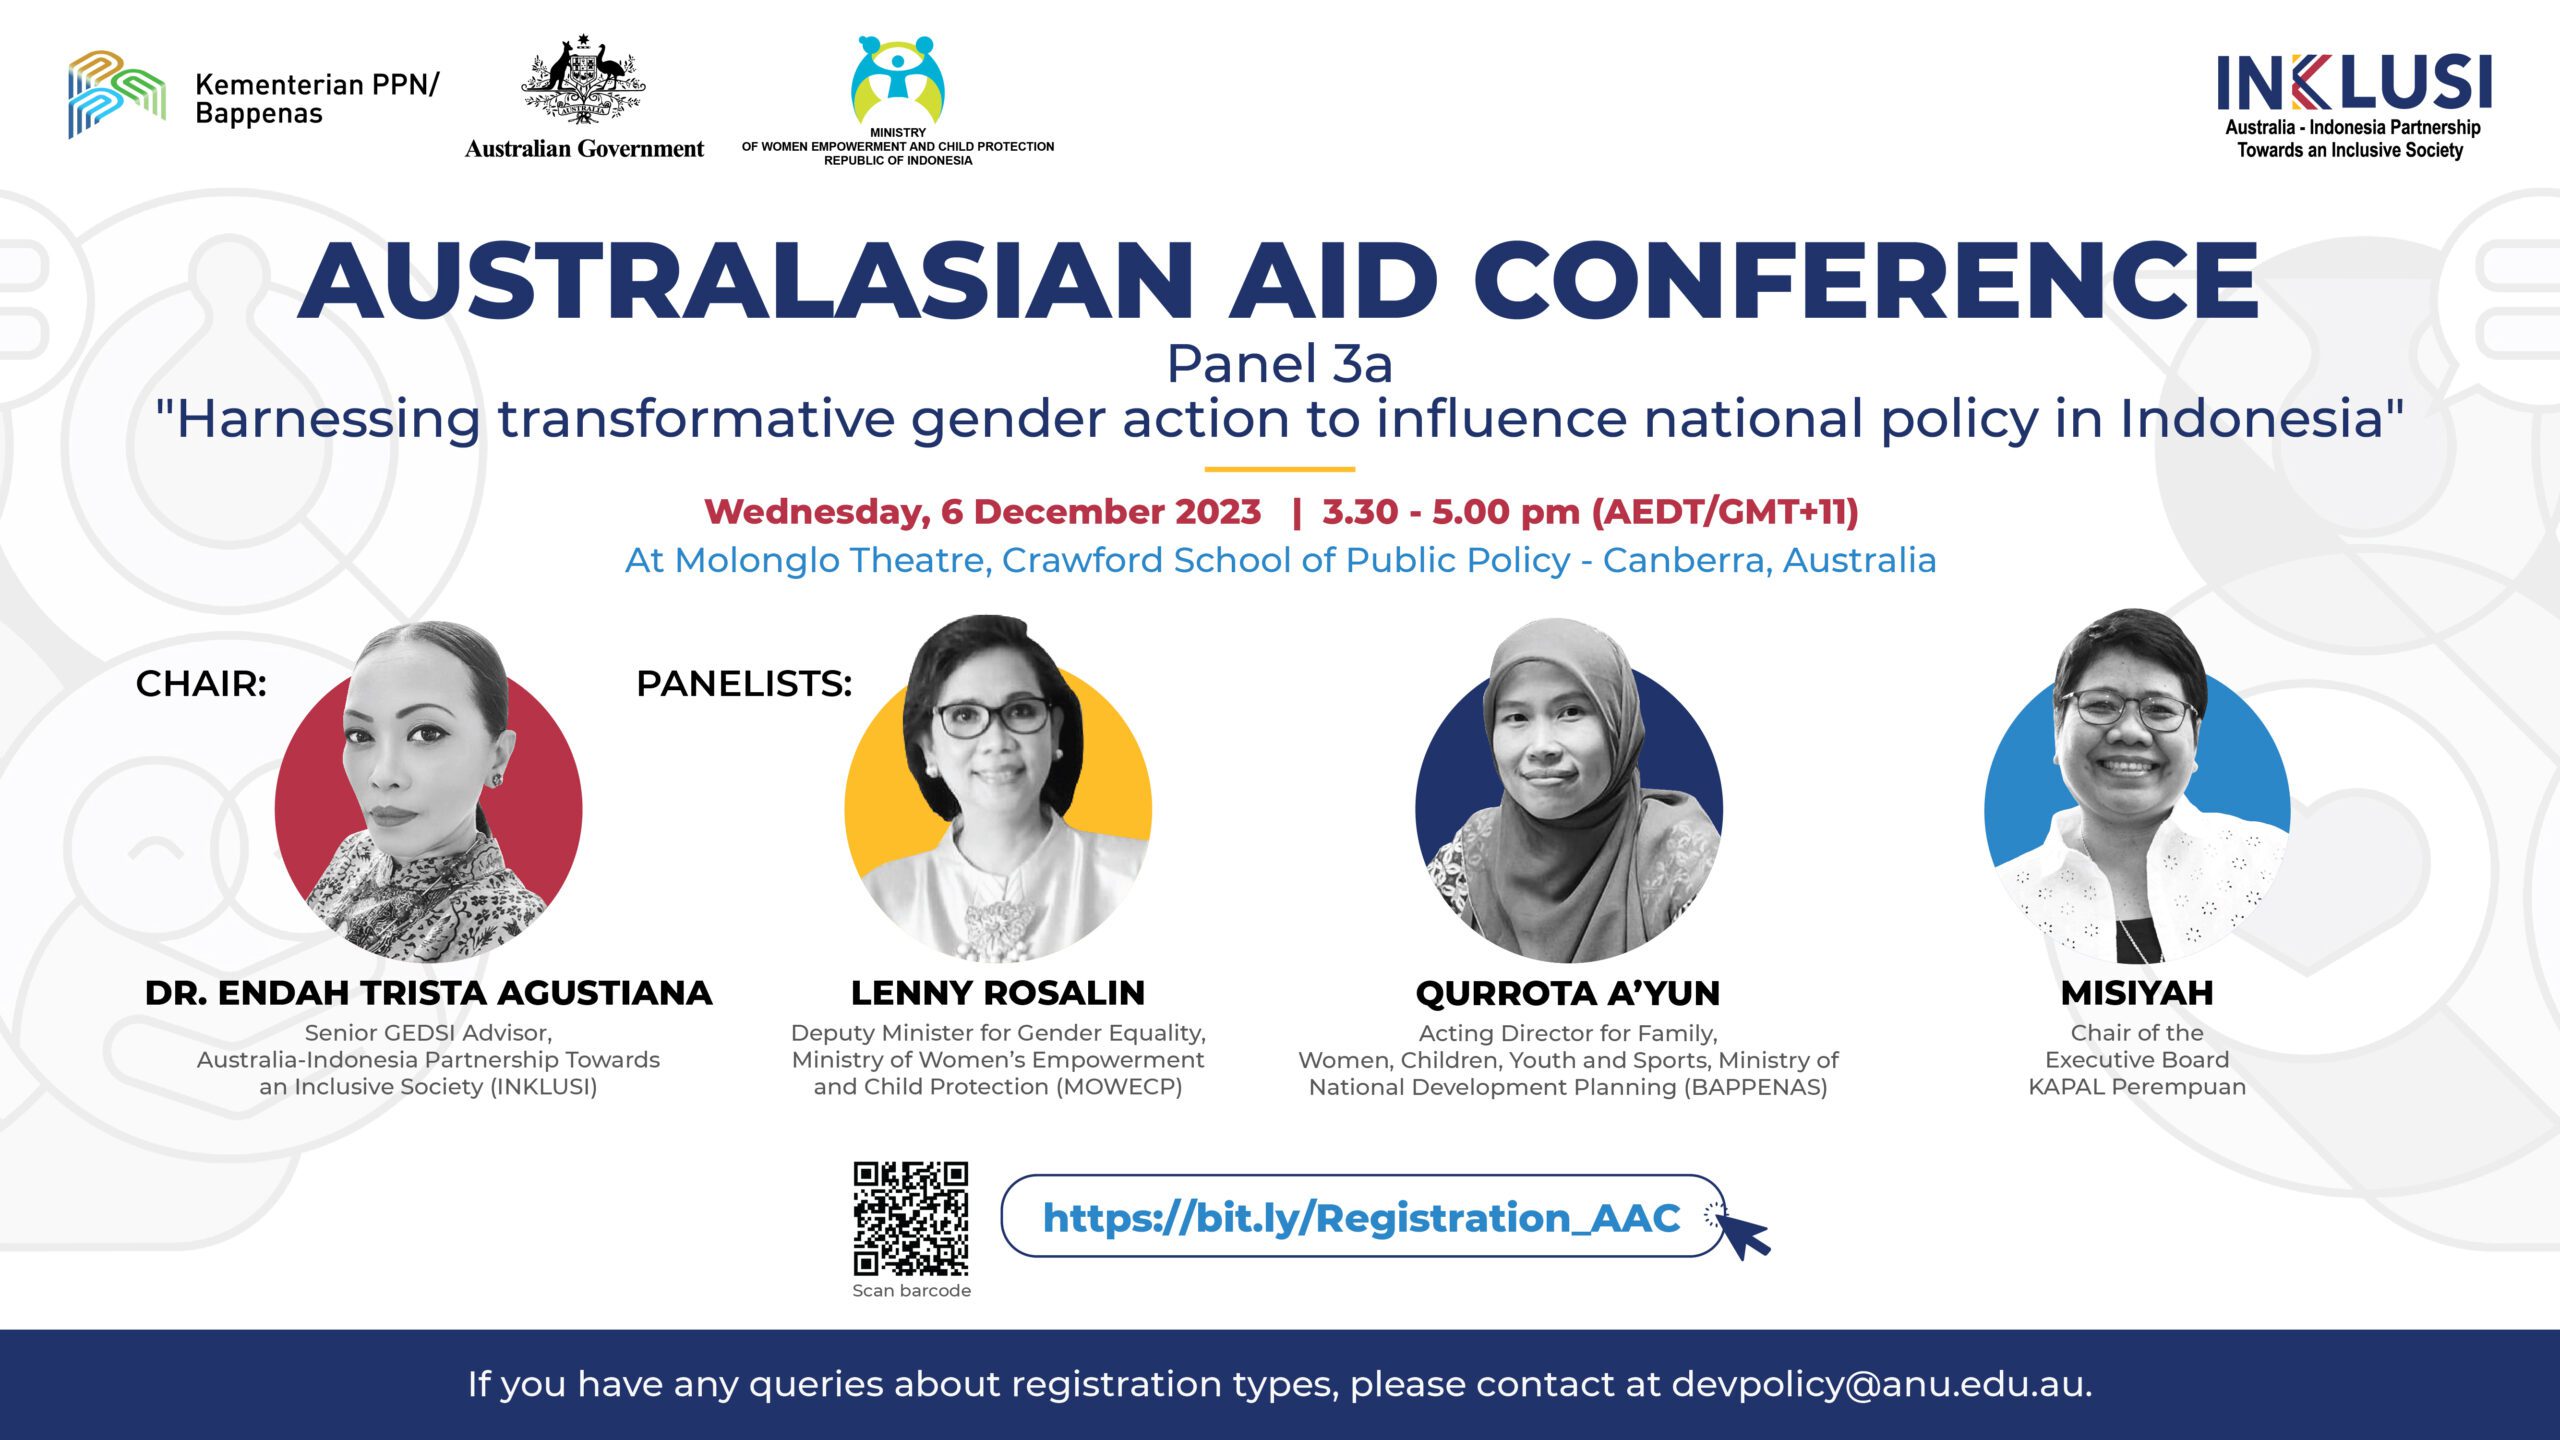 AUSTRALASIAN AID CONFERENCE: “Harnessing Transformative Gender Action to Influence National Policy in Indonesia” (Panel 3a)